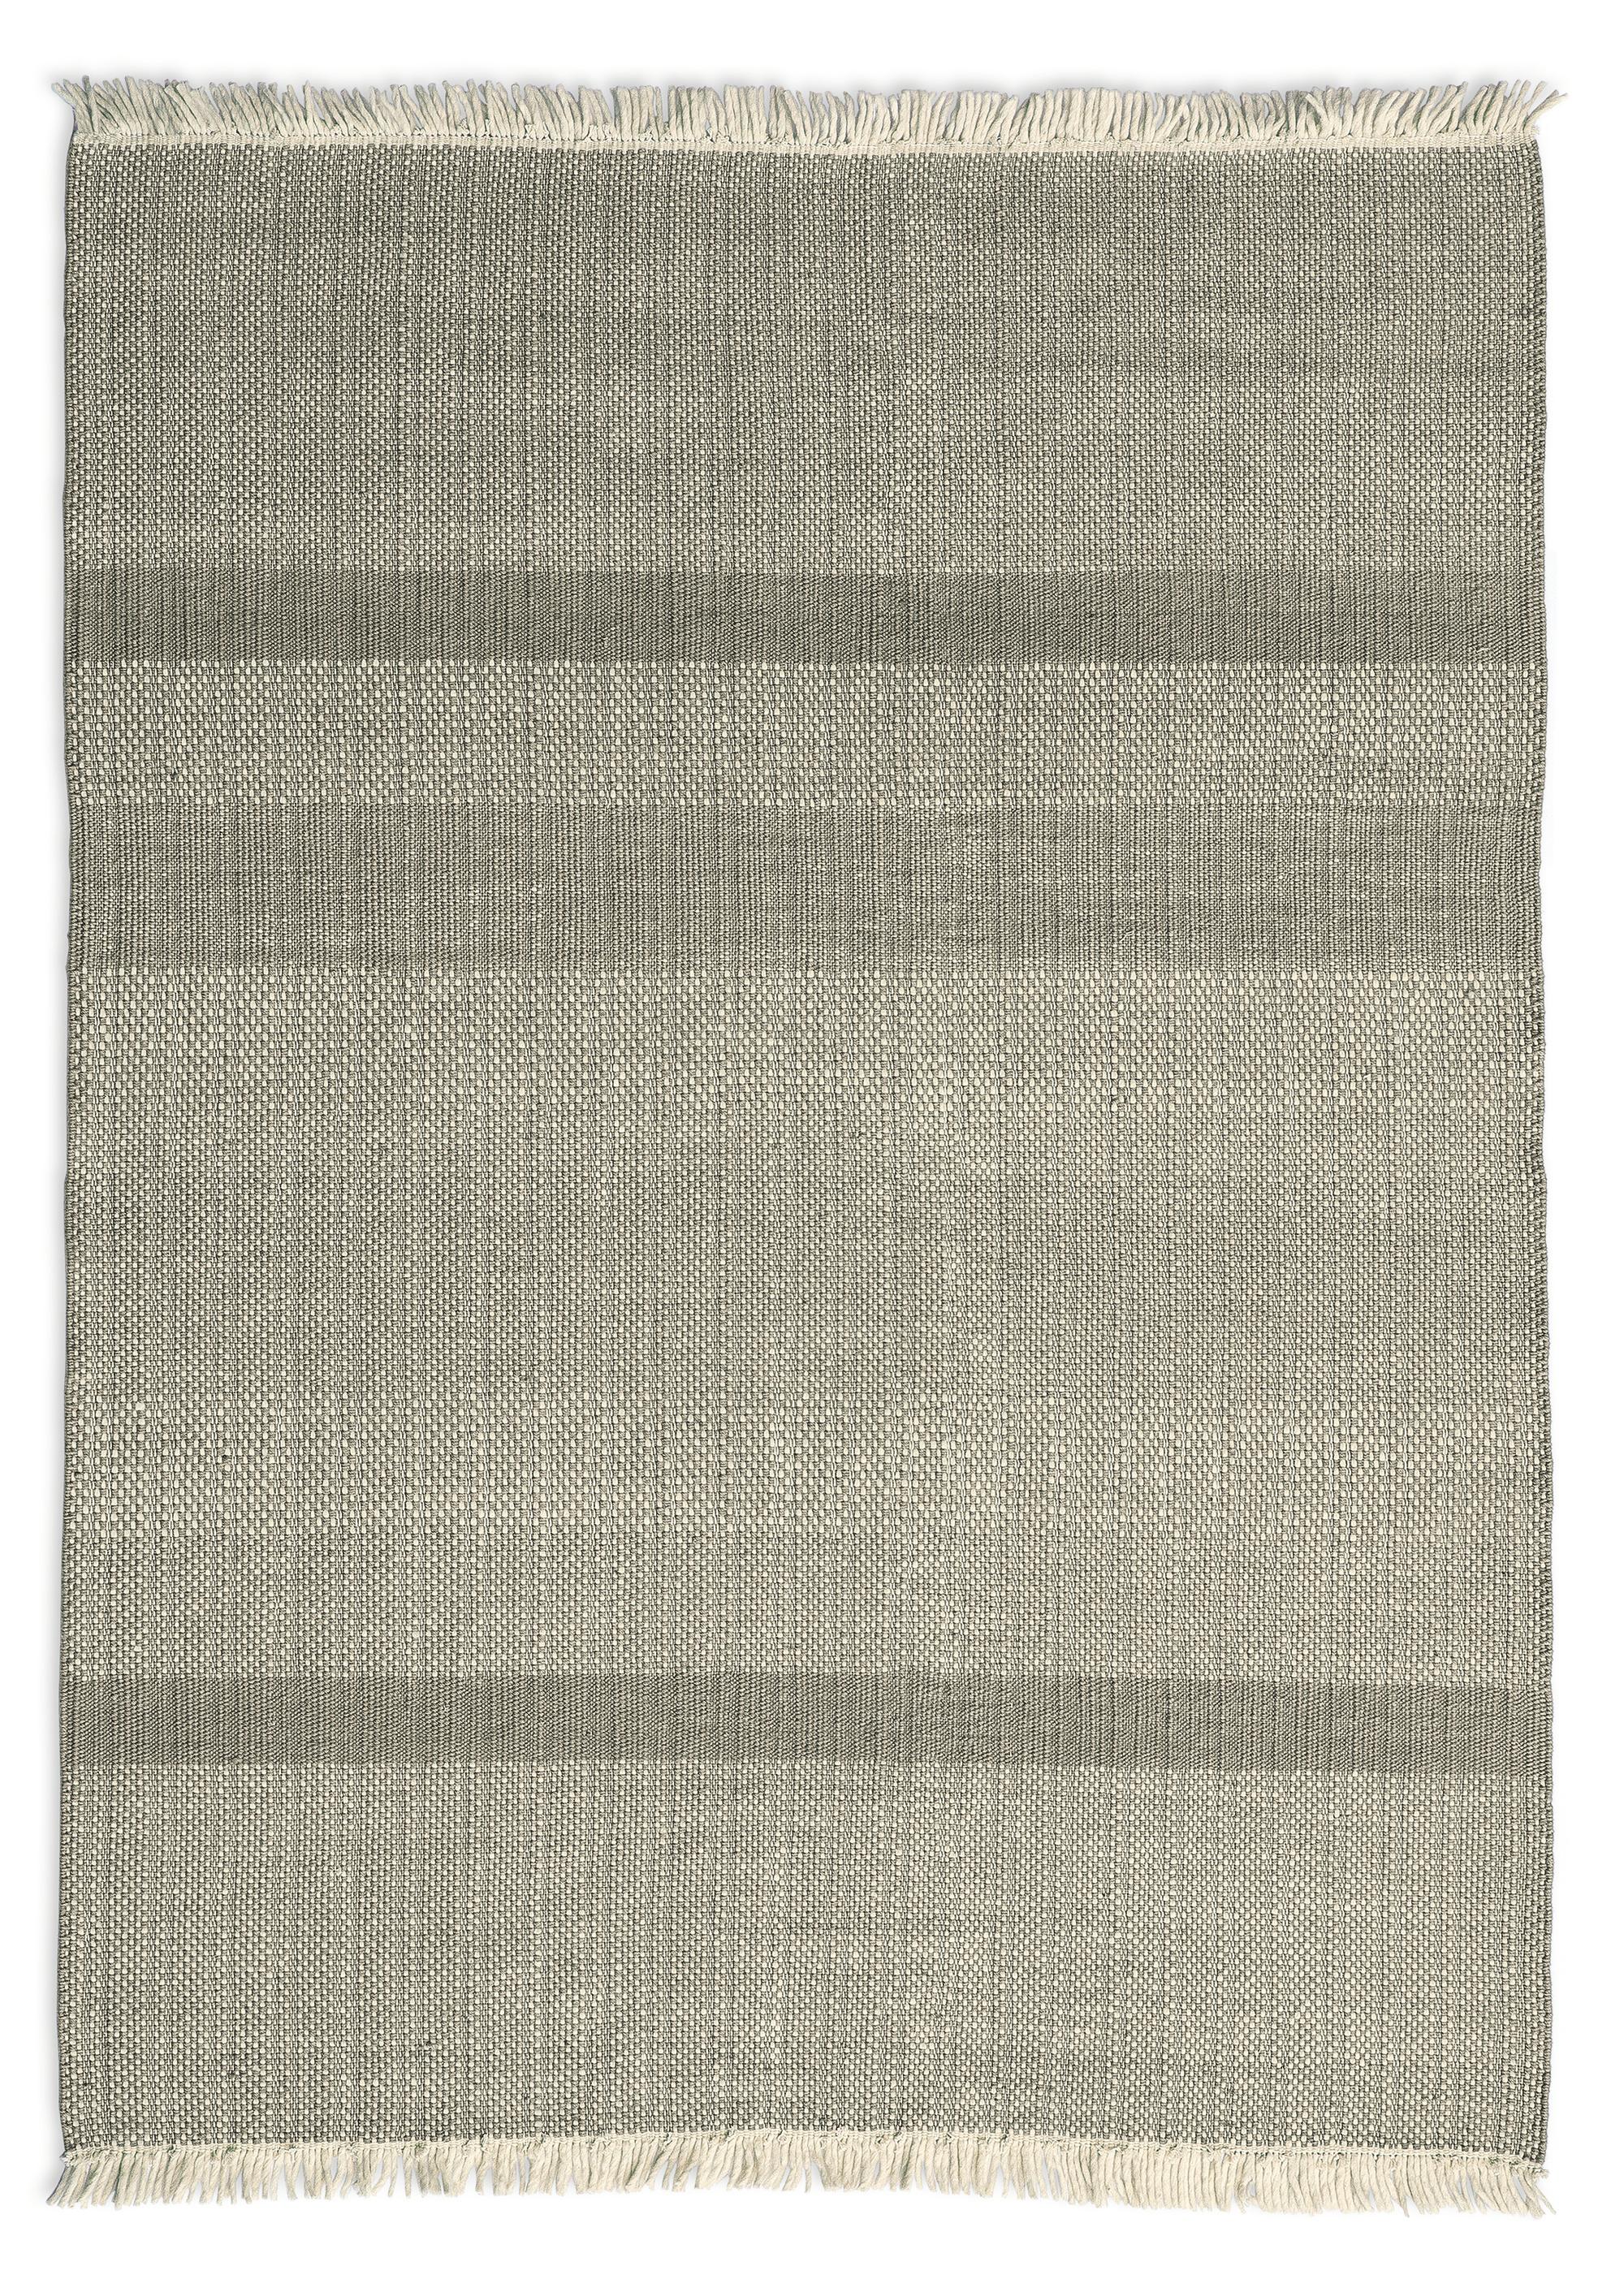 Small 'Tres Texture' Hand-Loomed Rug for Nanimarquina For Sale 3